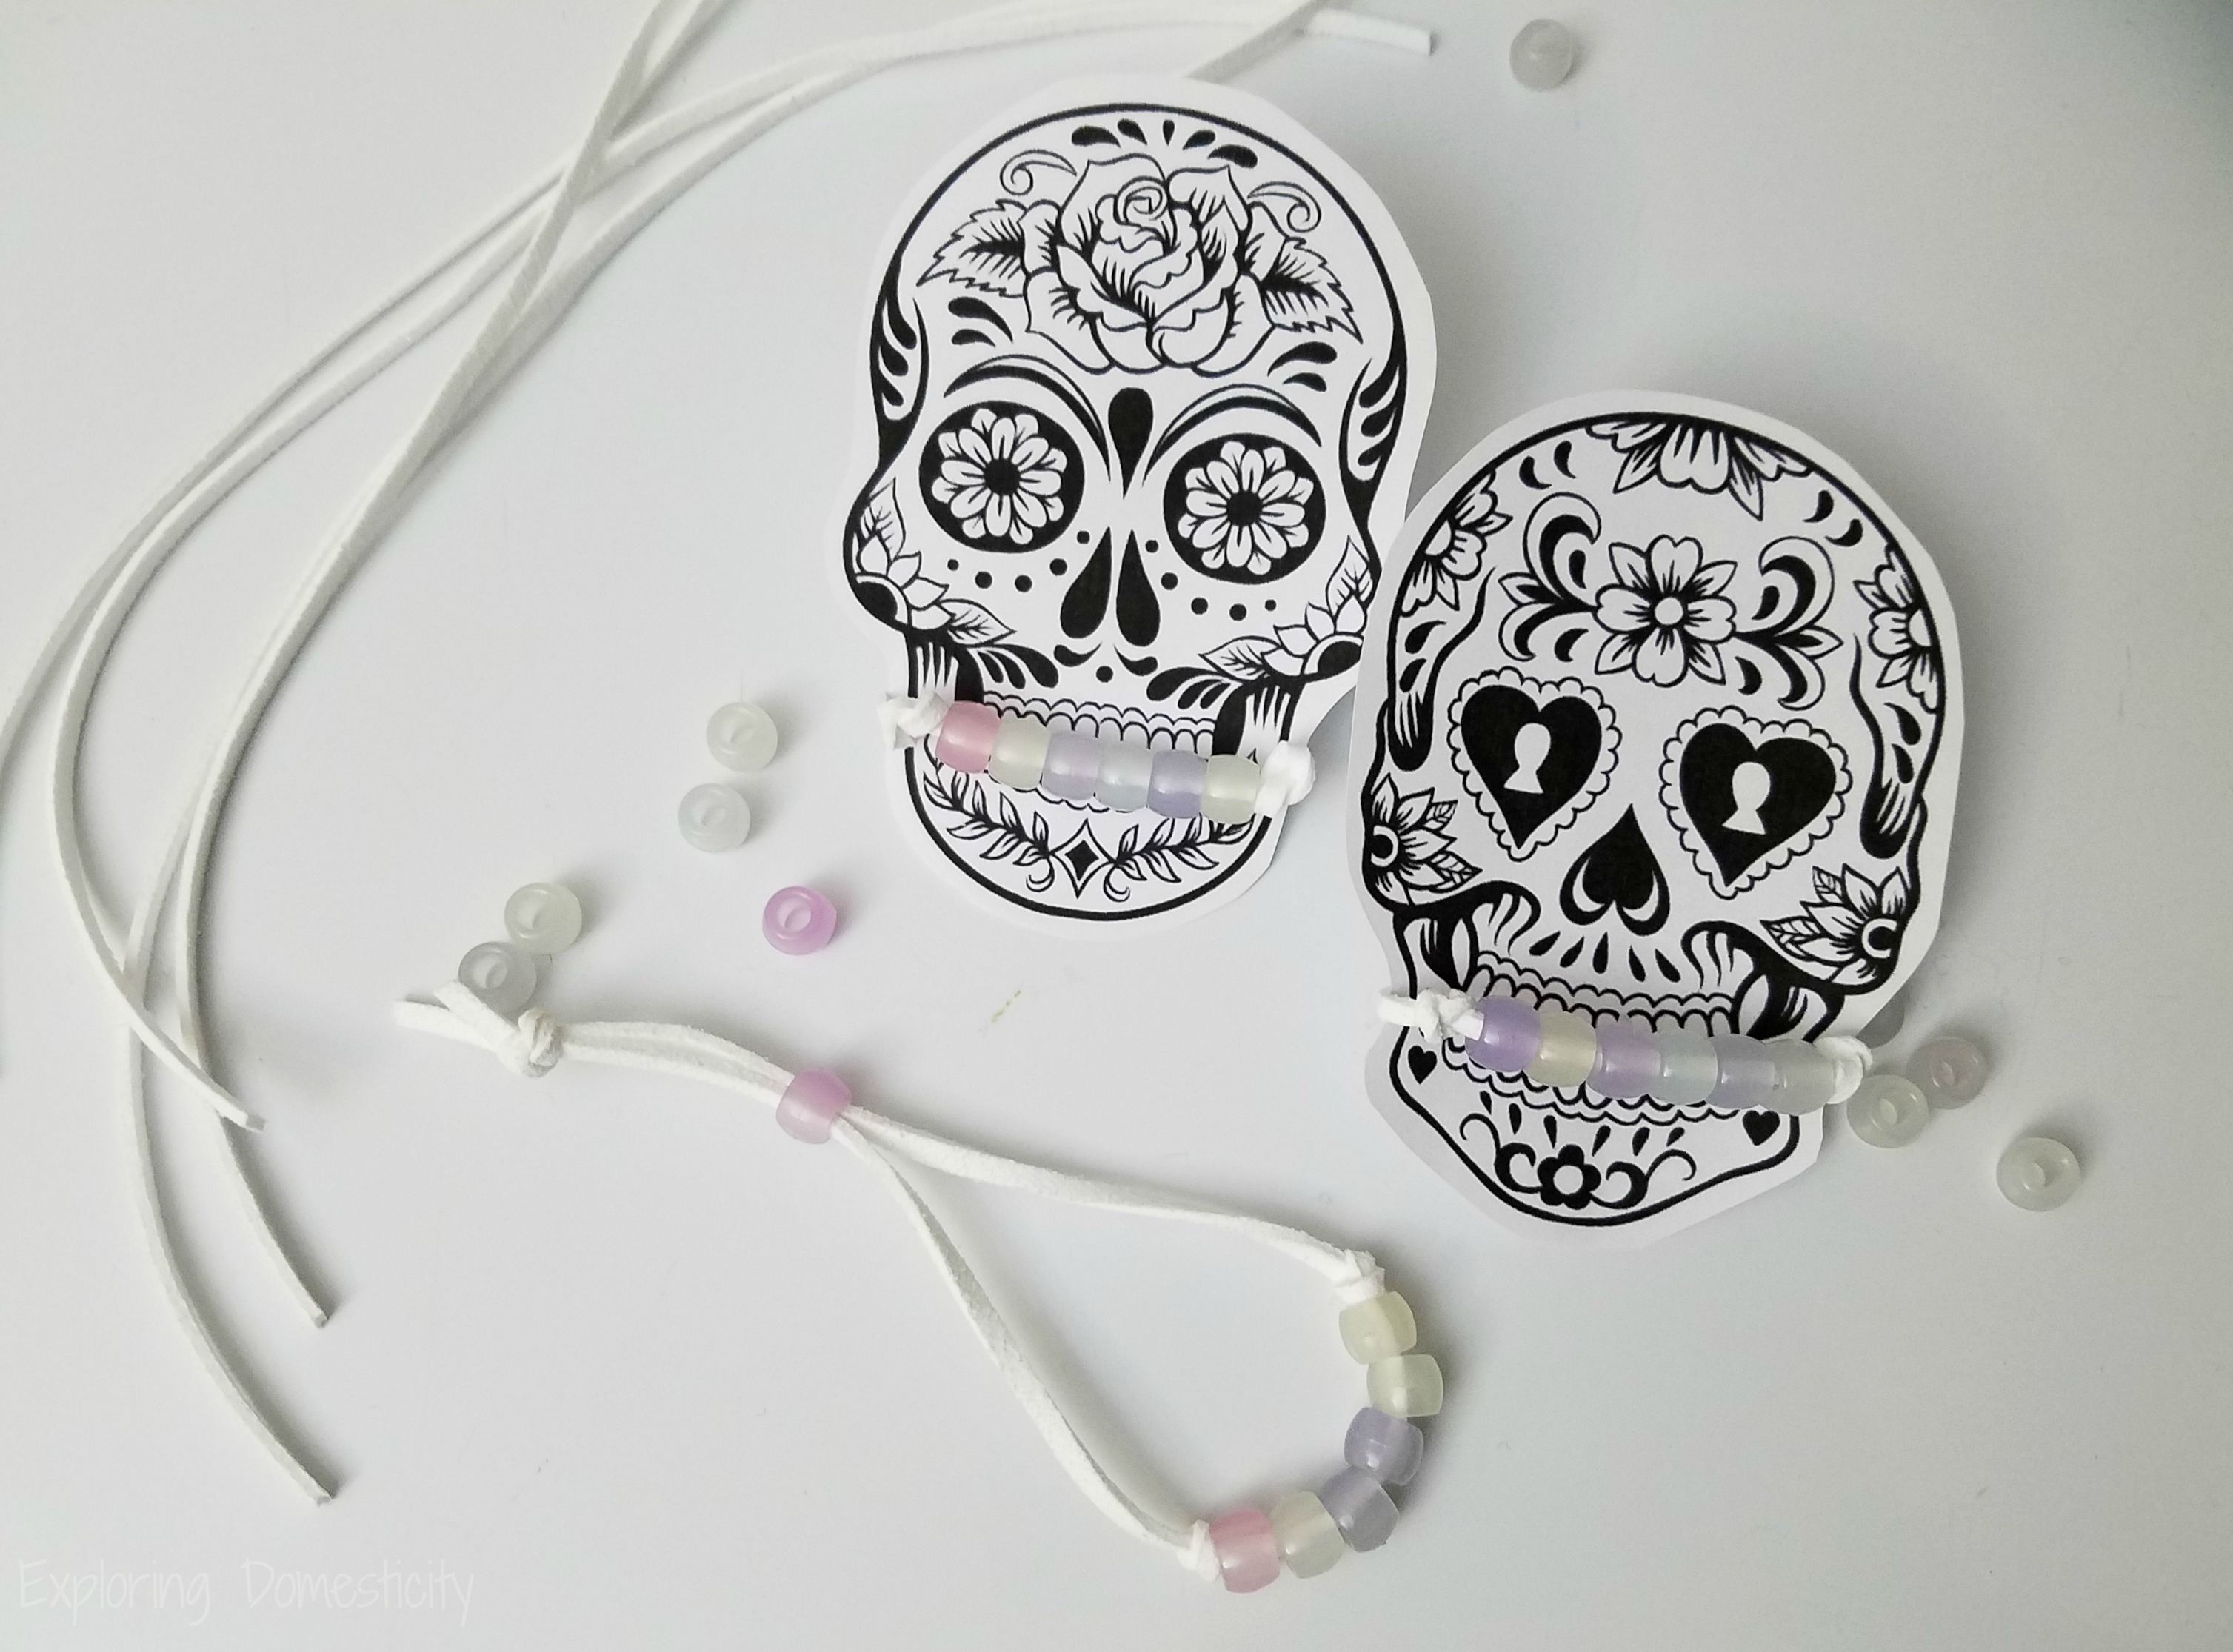 Sugar Skull Halloween Class Treats Inspired by Disney's Coco with color-changing bracelets